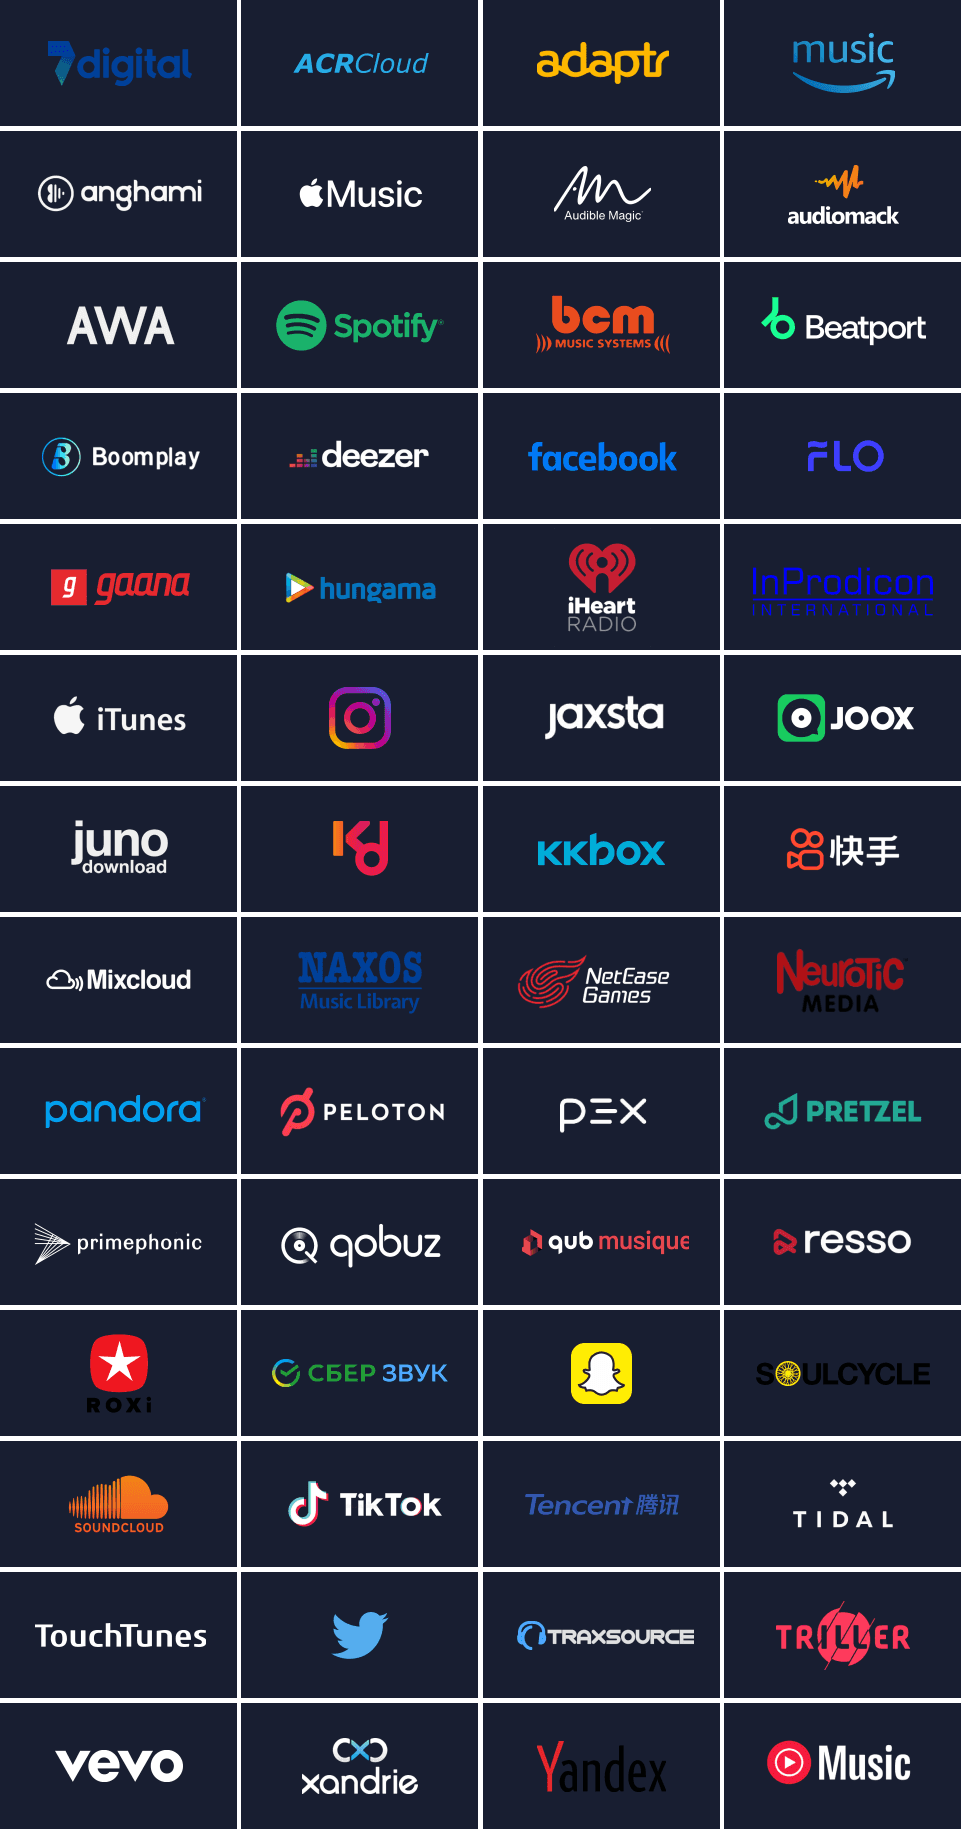 Logo overview of music distribution companies, like Apple Music, Deezer, beatport, ITunes, TikTok, Soundcloud, Tidal and many more.